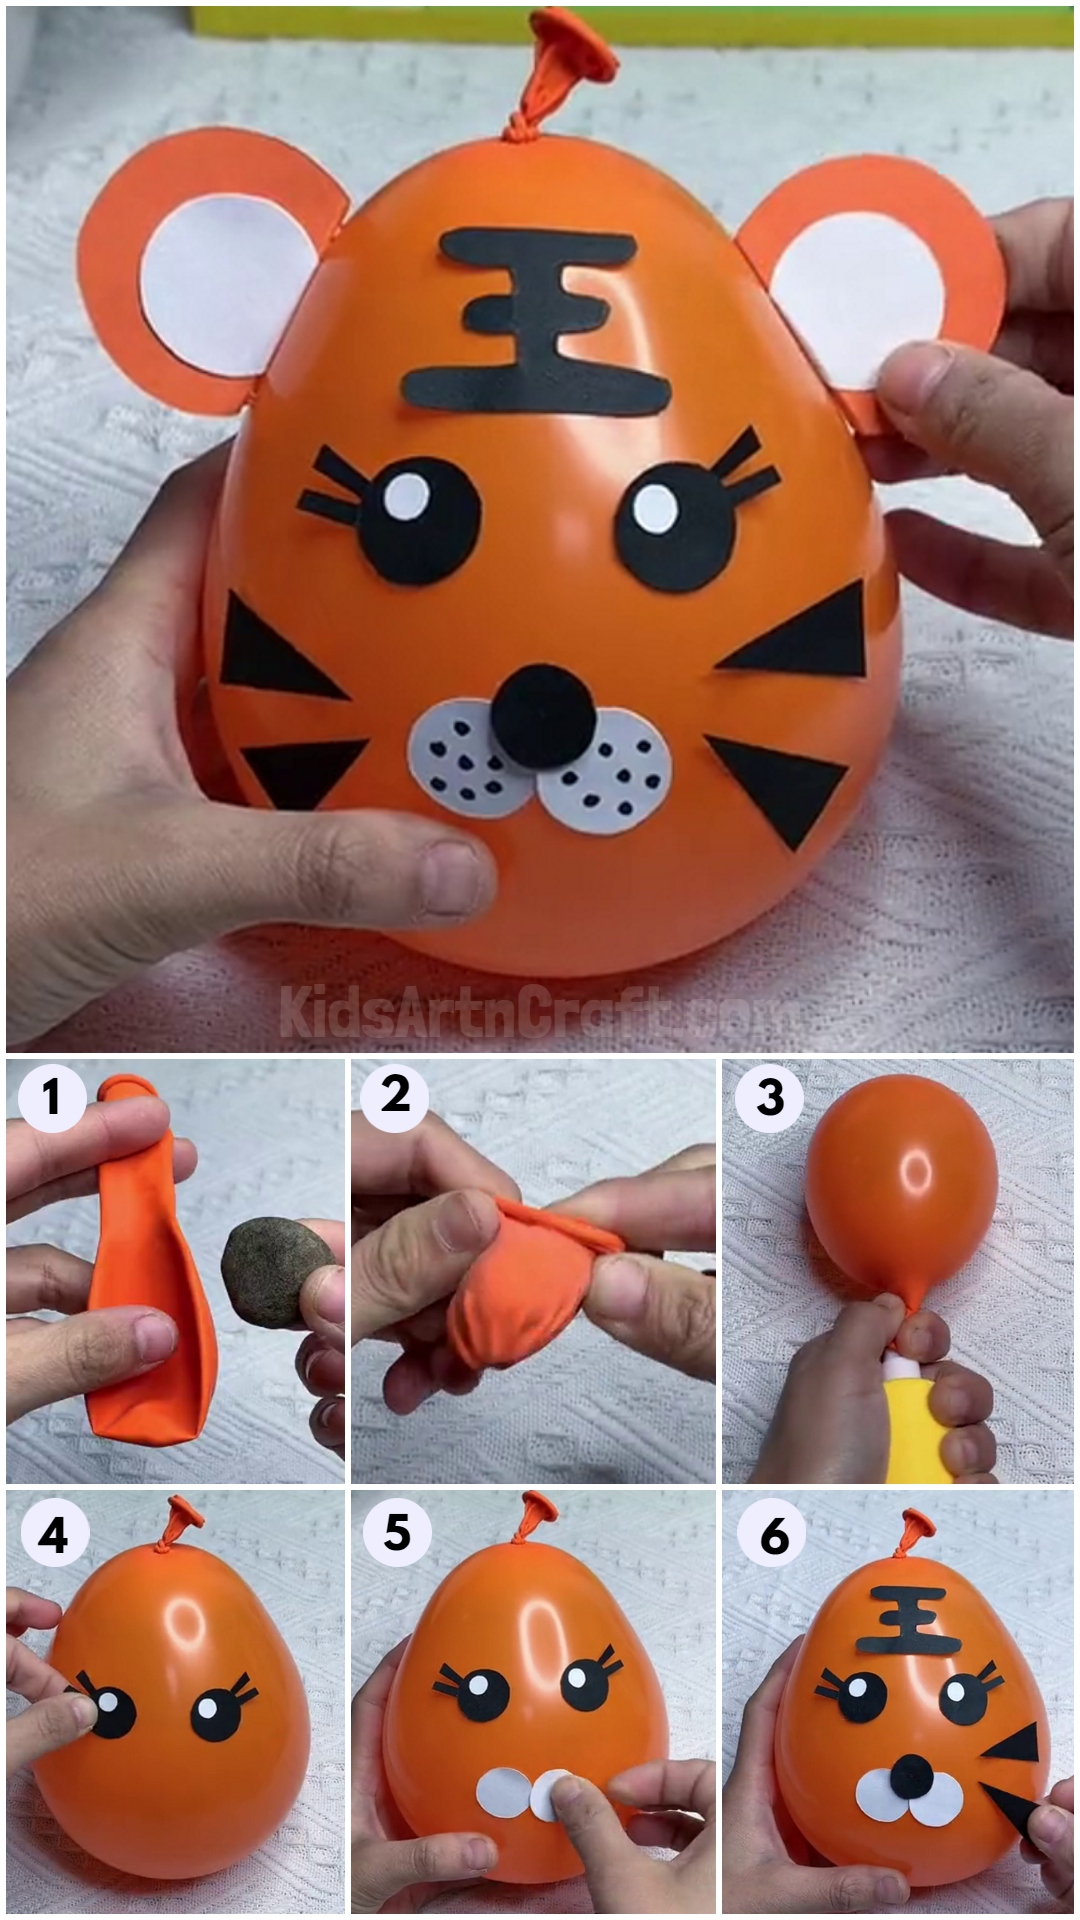 Tiger Balloon Craft Step by Step Tutorial For Kids-Step-by-Step Tutorial for Creating a Tiger Balloon for Kids